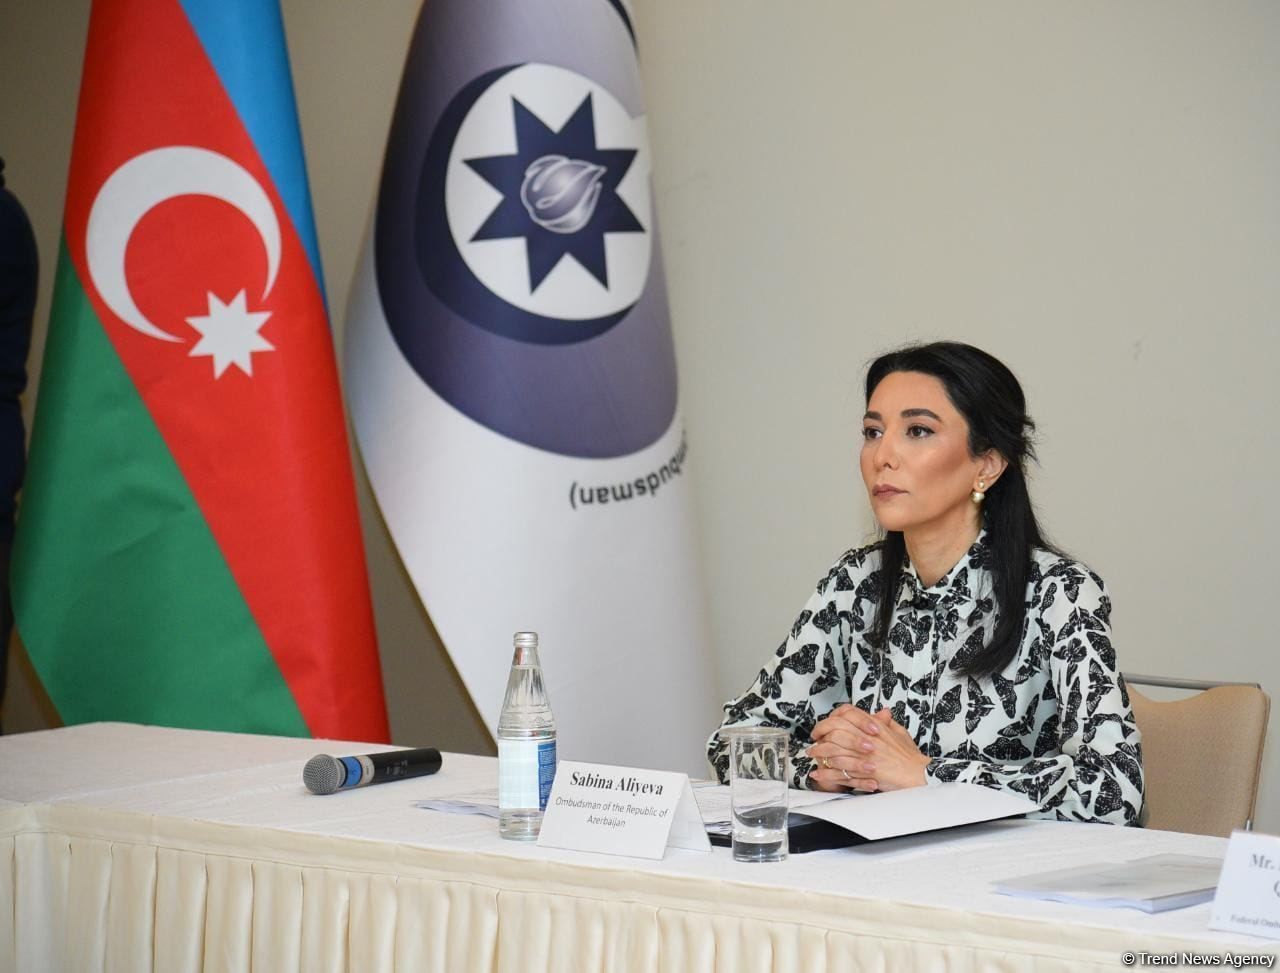 Ombudswoman objects to extension of Azerbaijani military servicemen's prison term illegally captured by Armenia